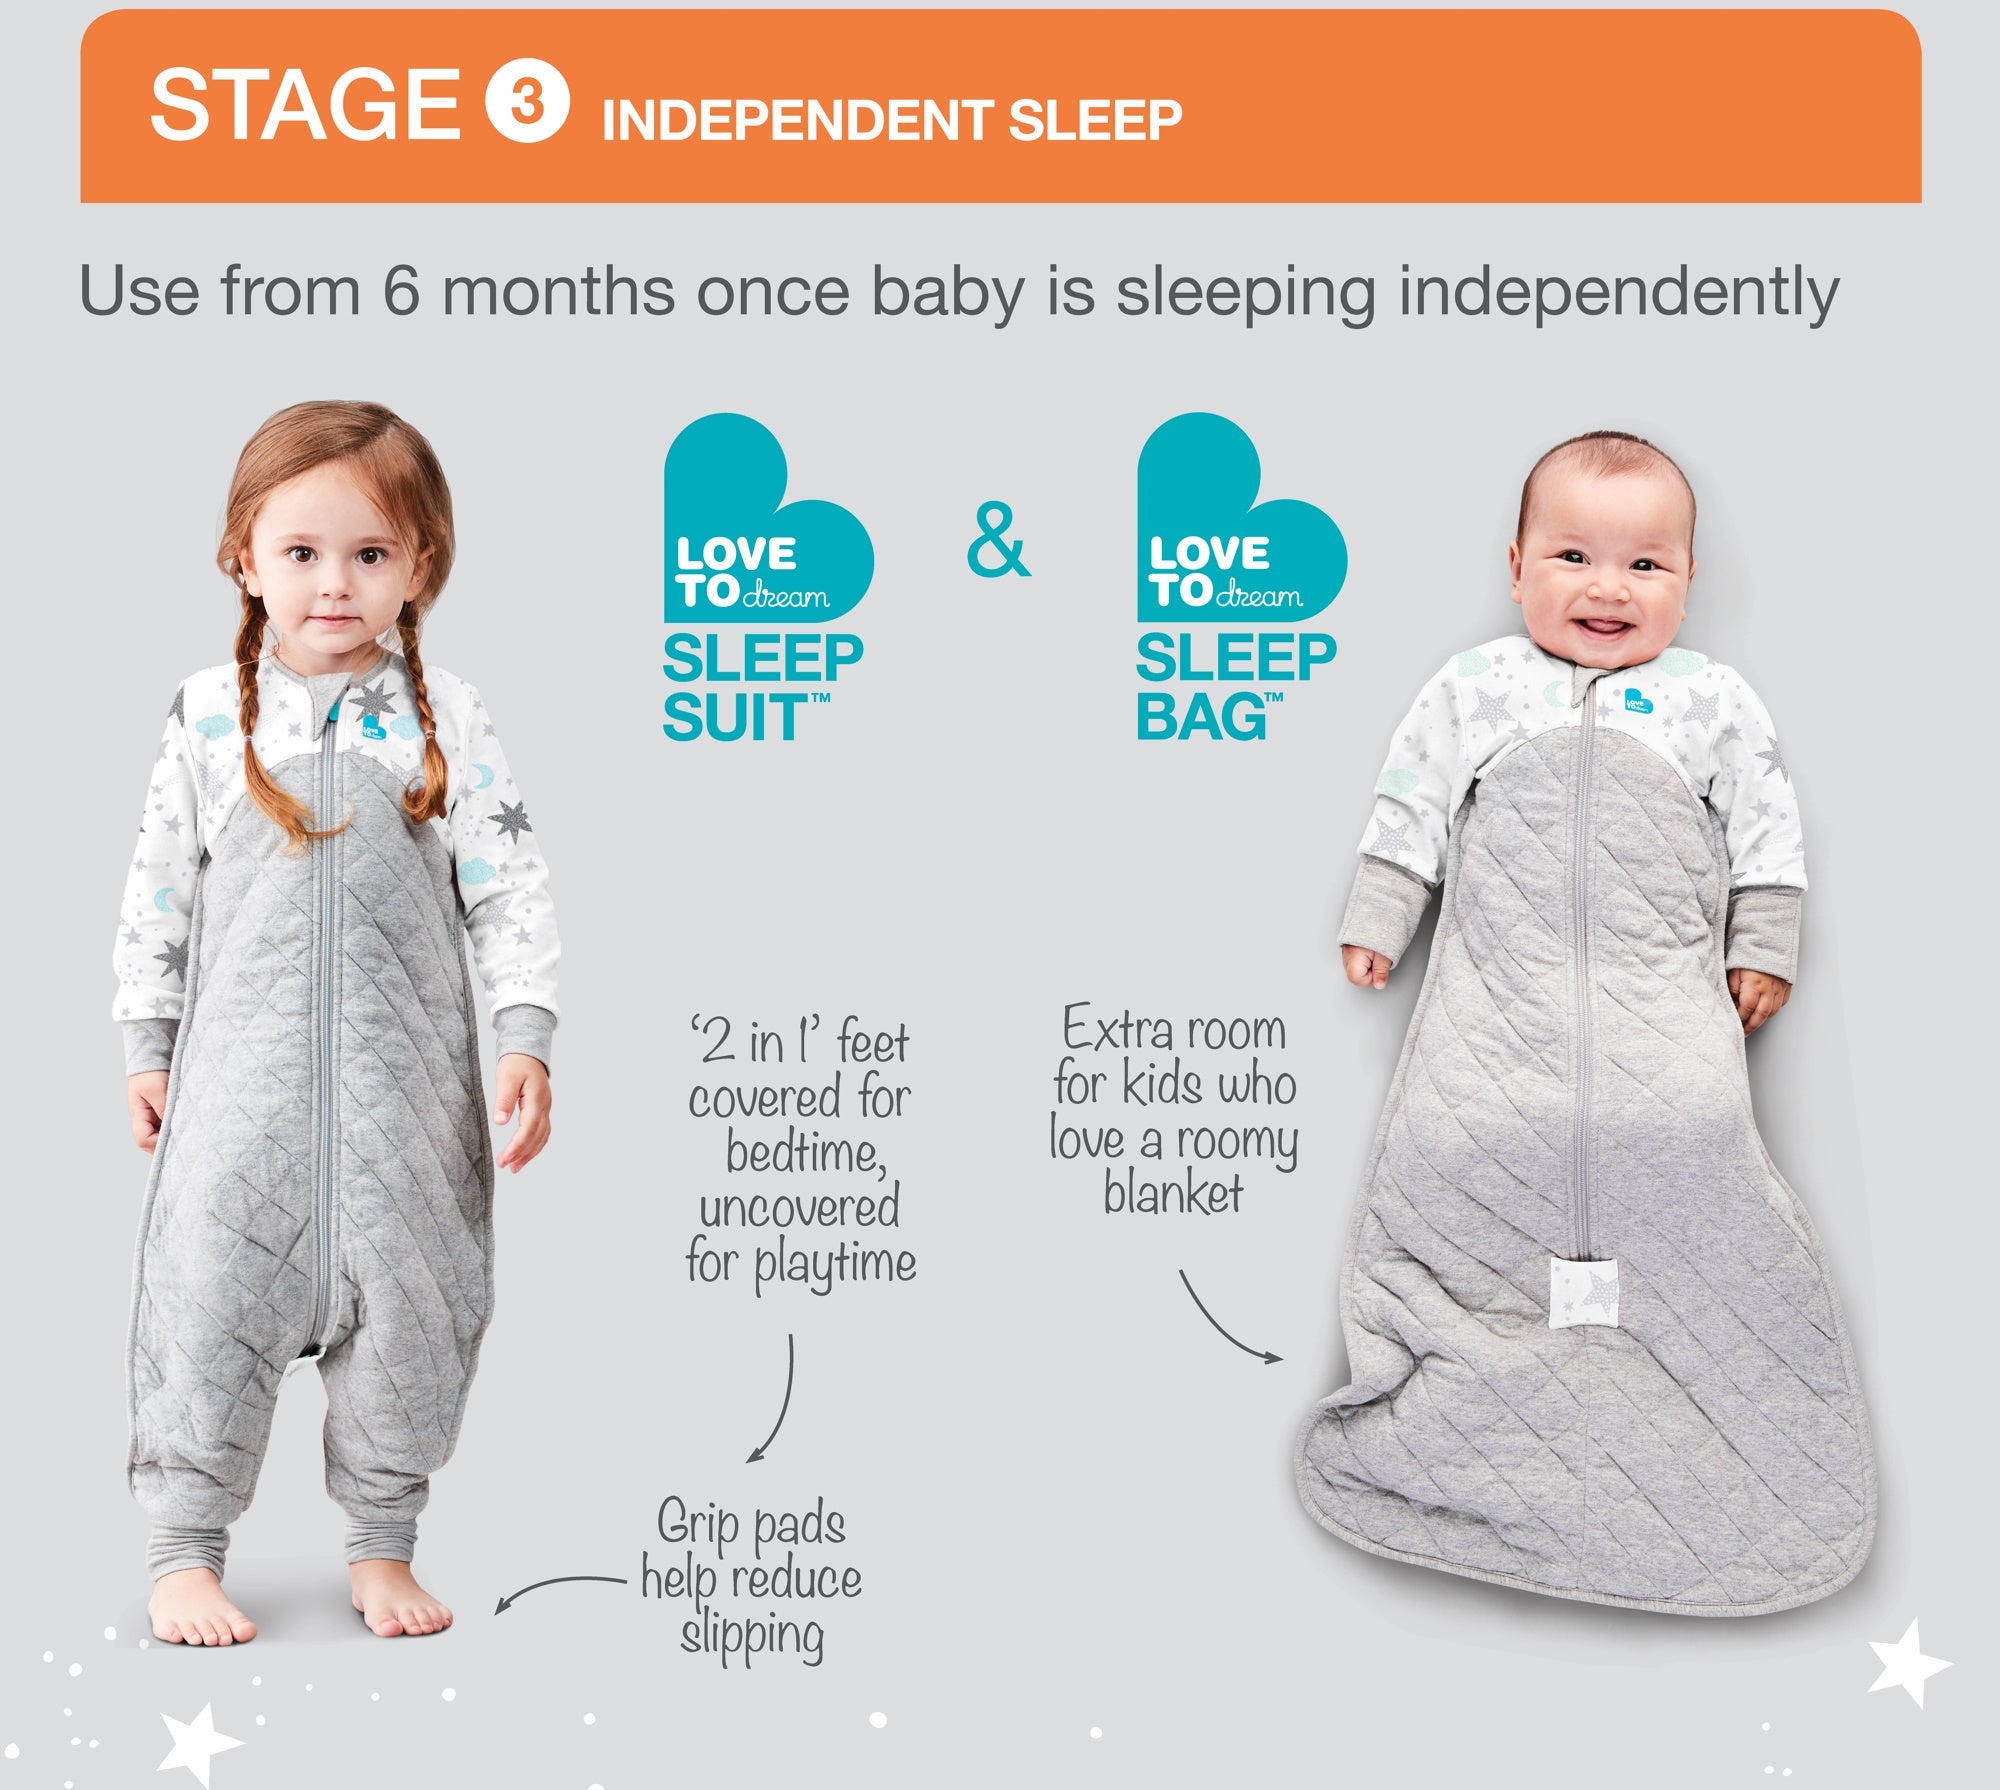 Merino Wool Baby Clothes: Why They're Best for Sleeping, Play and Everyday